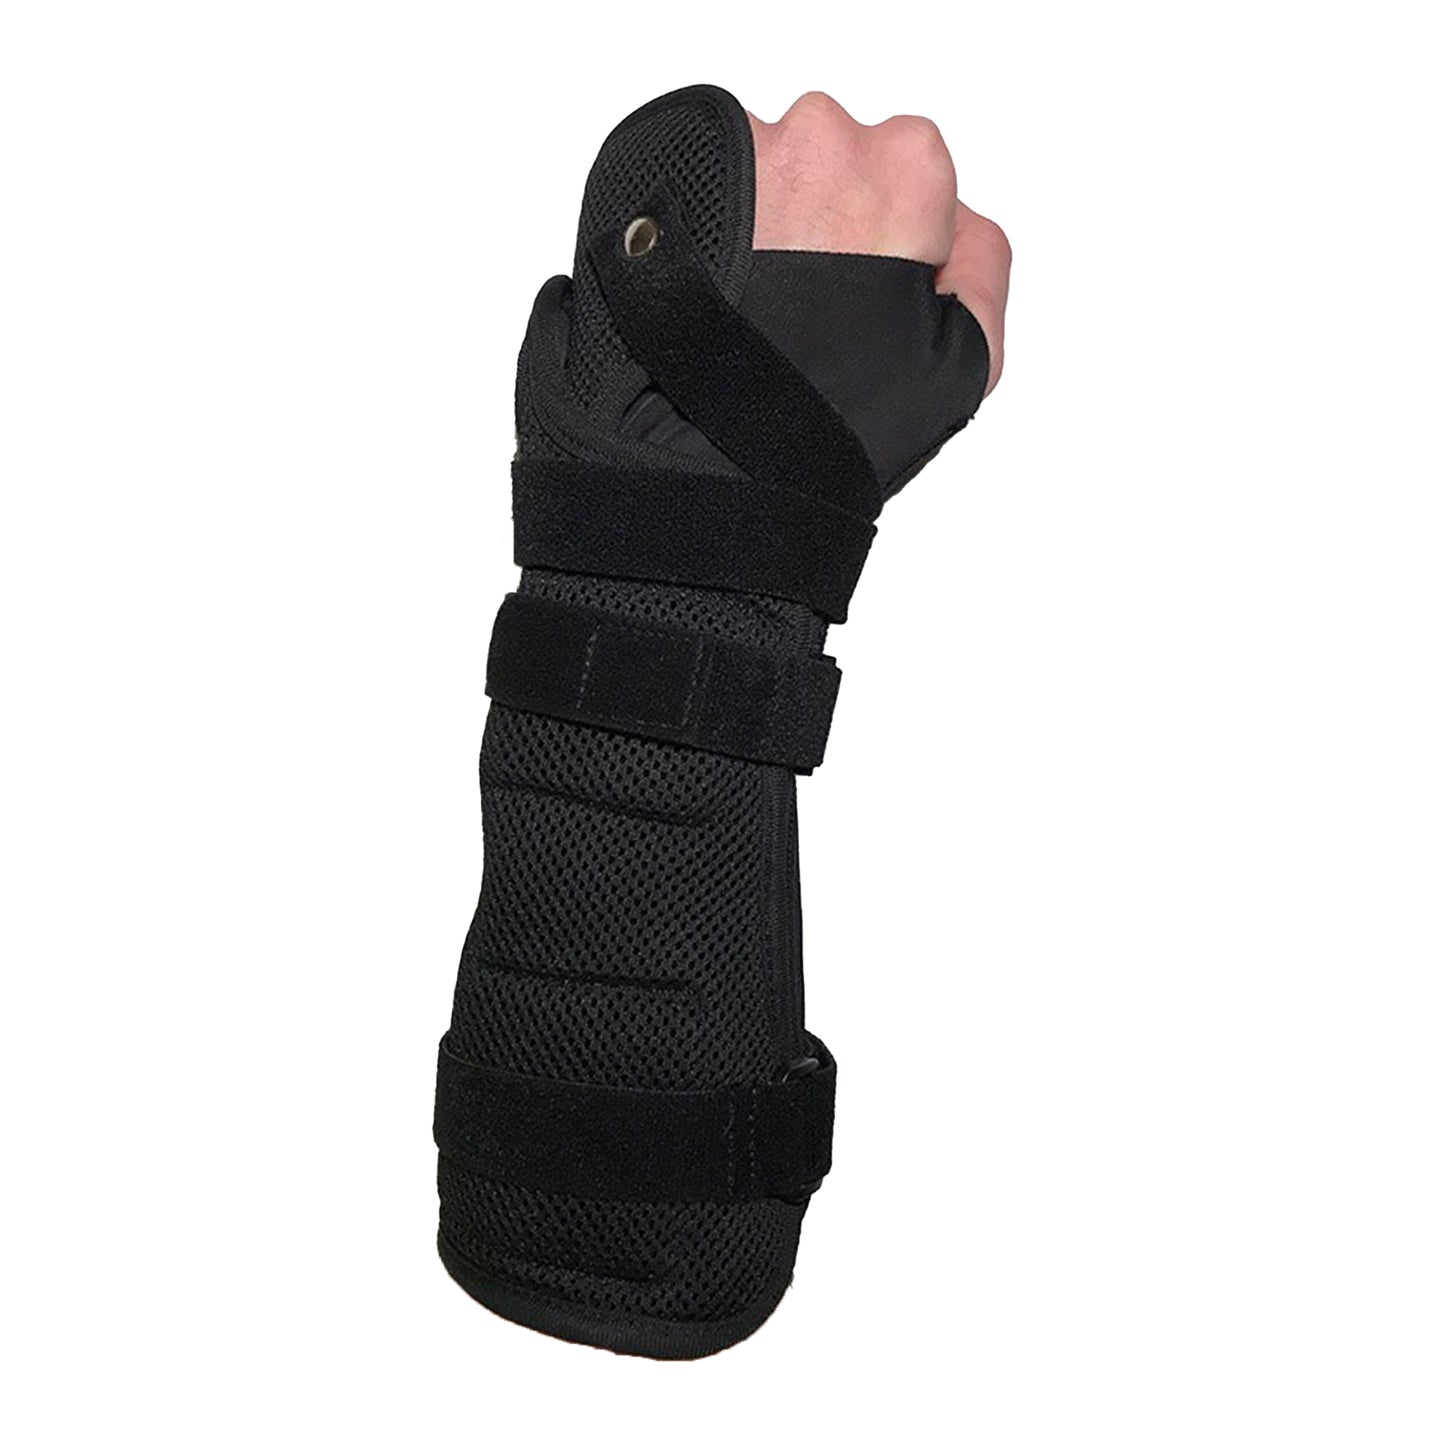 Dr Medical DRMS The Maximus Universal Large Wrist Support Brace - USA Supply